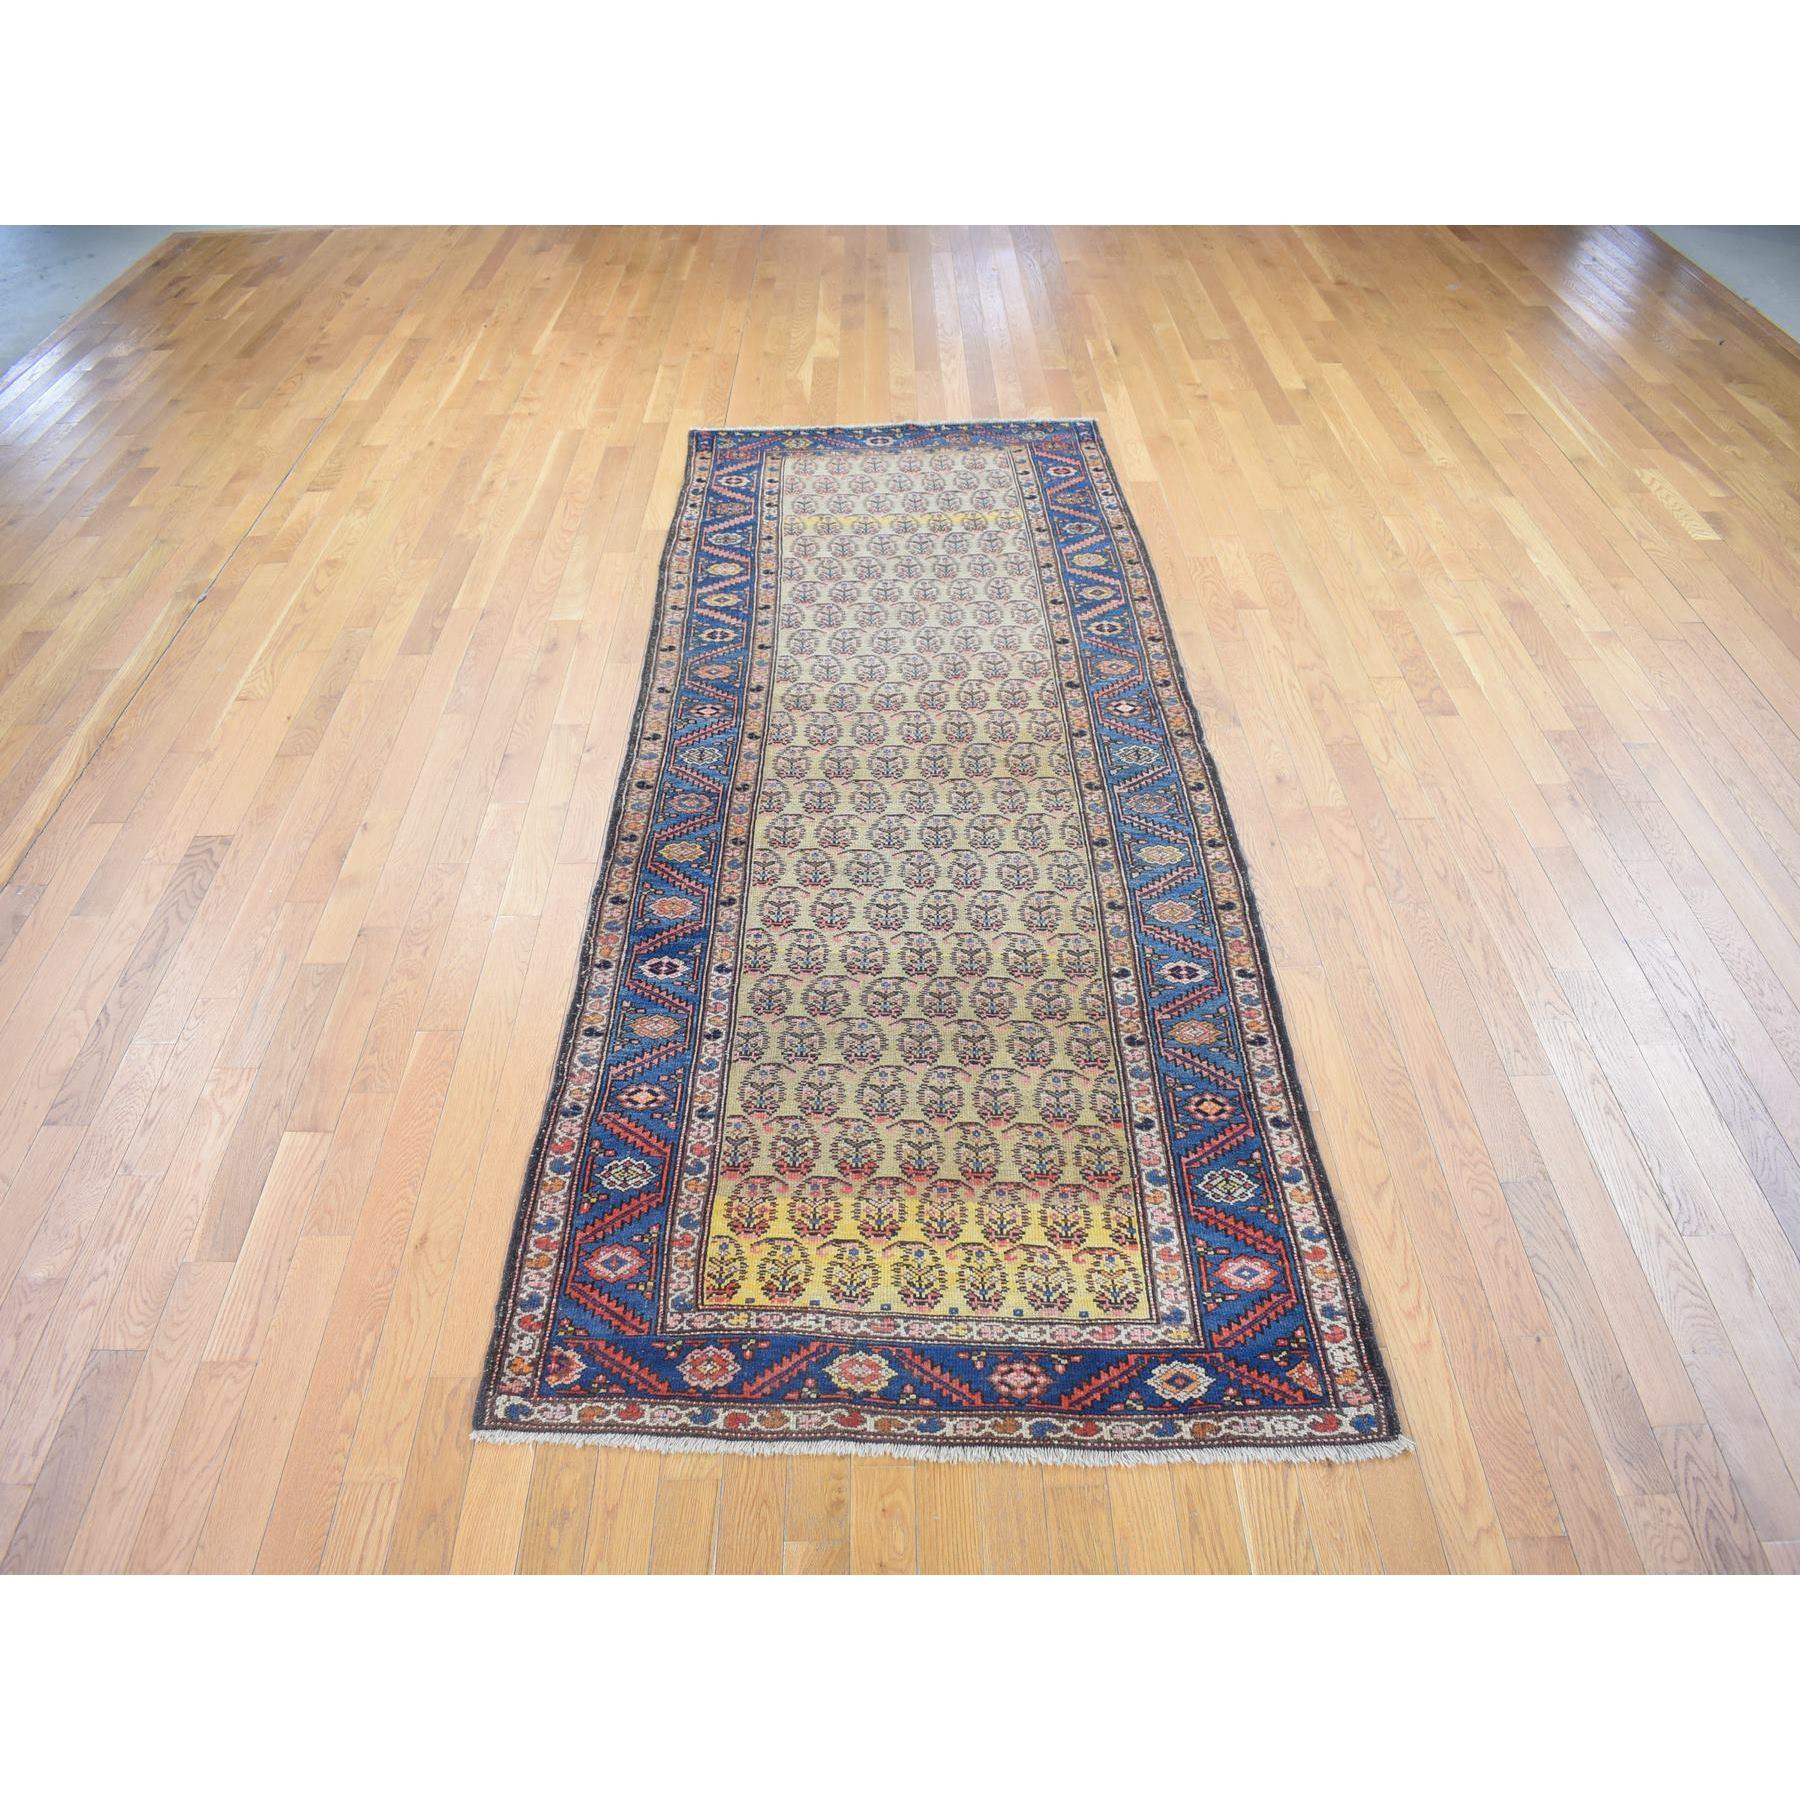 This fabulous hand-knotted carpet has been created and designed for extra strength and durability. This rug has been handcrafted for weeks in the traditional method that is used to make
Exact Rug Size in Feet and Inches : 4'x10'3